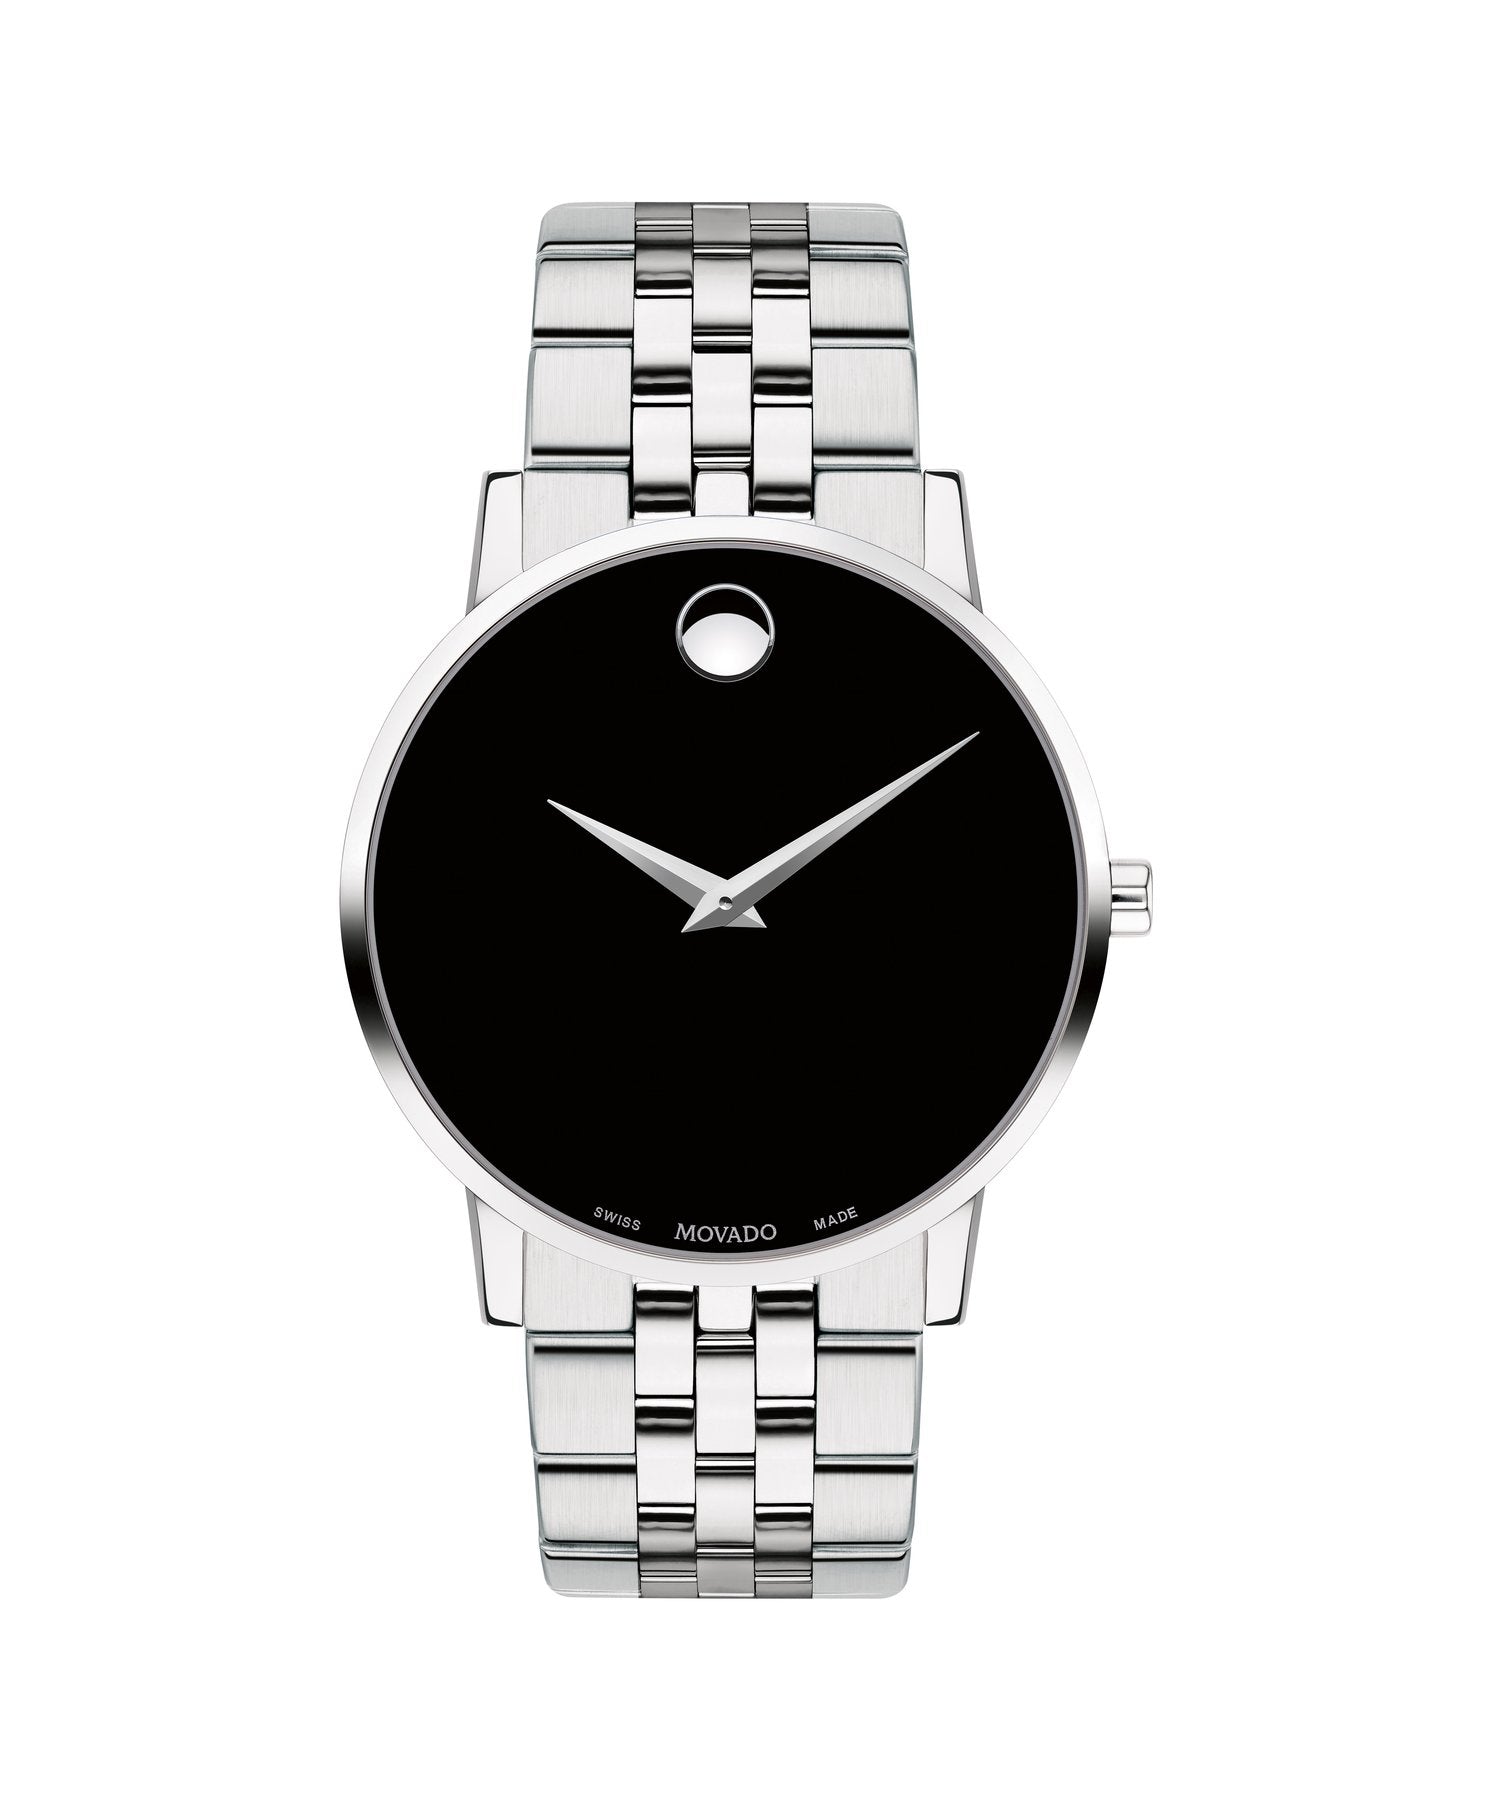 Movado Men’s Quartz Swiss Made Stainless Steel Black Dial 40mm Watch 0607199